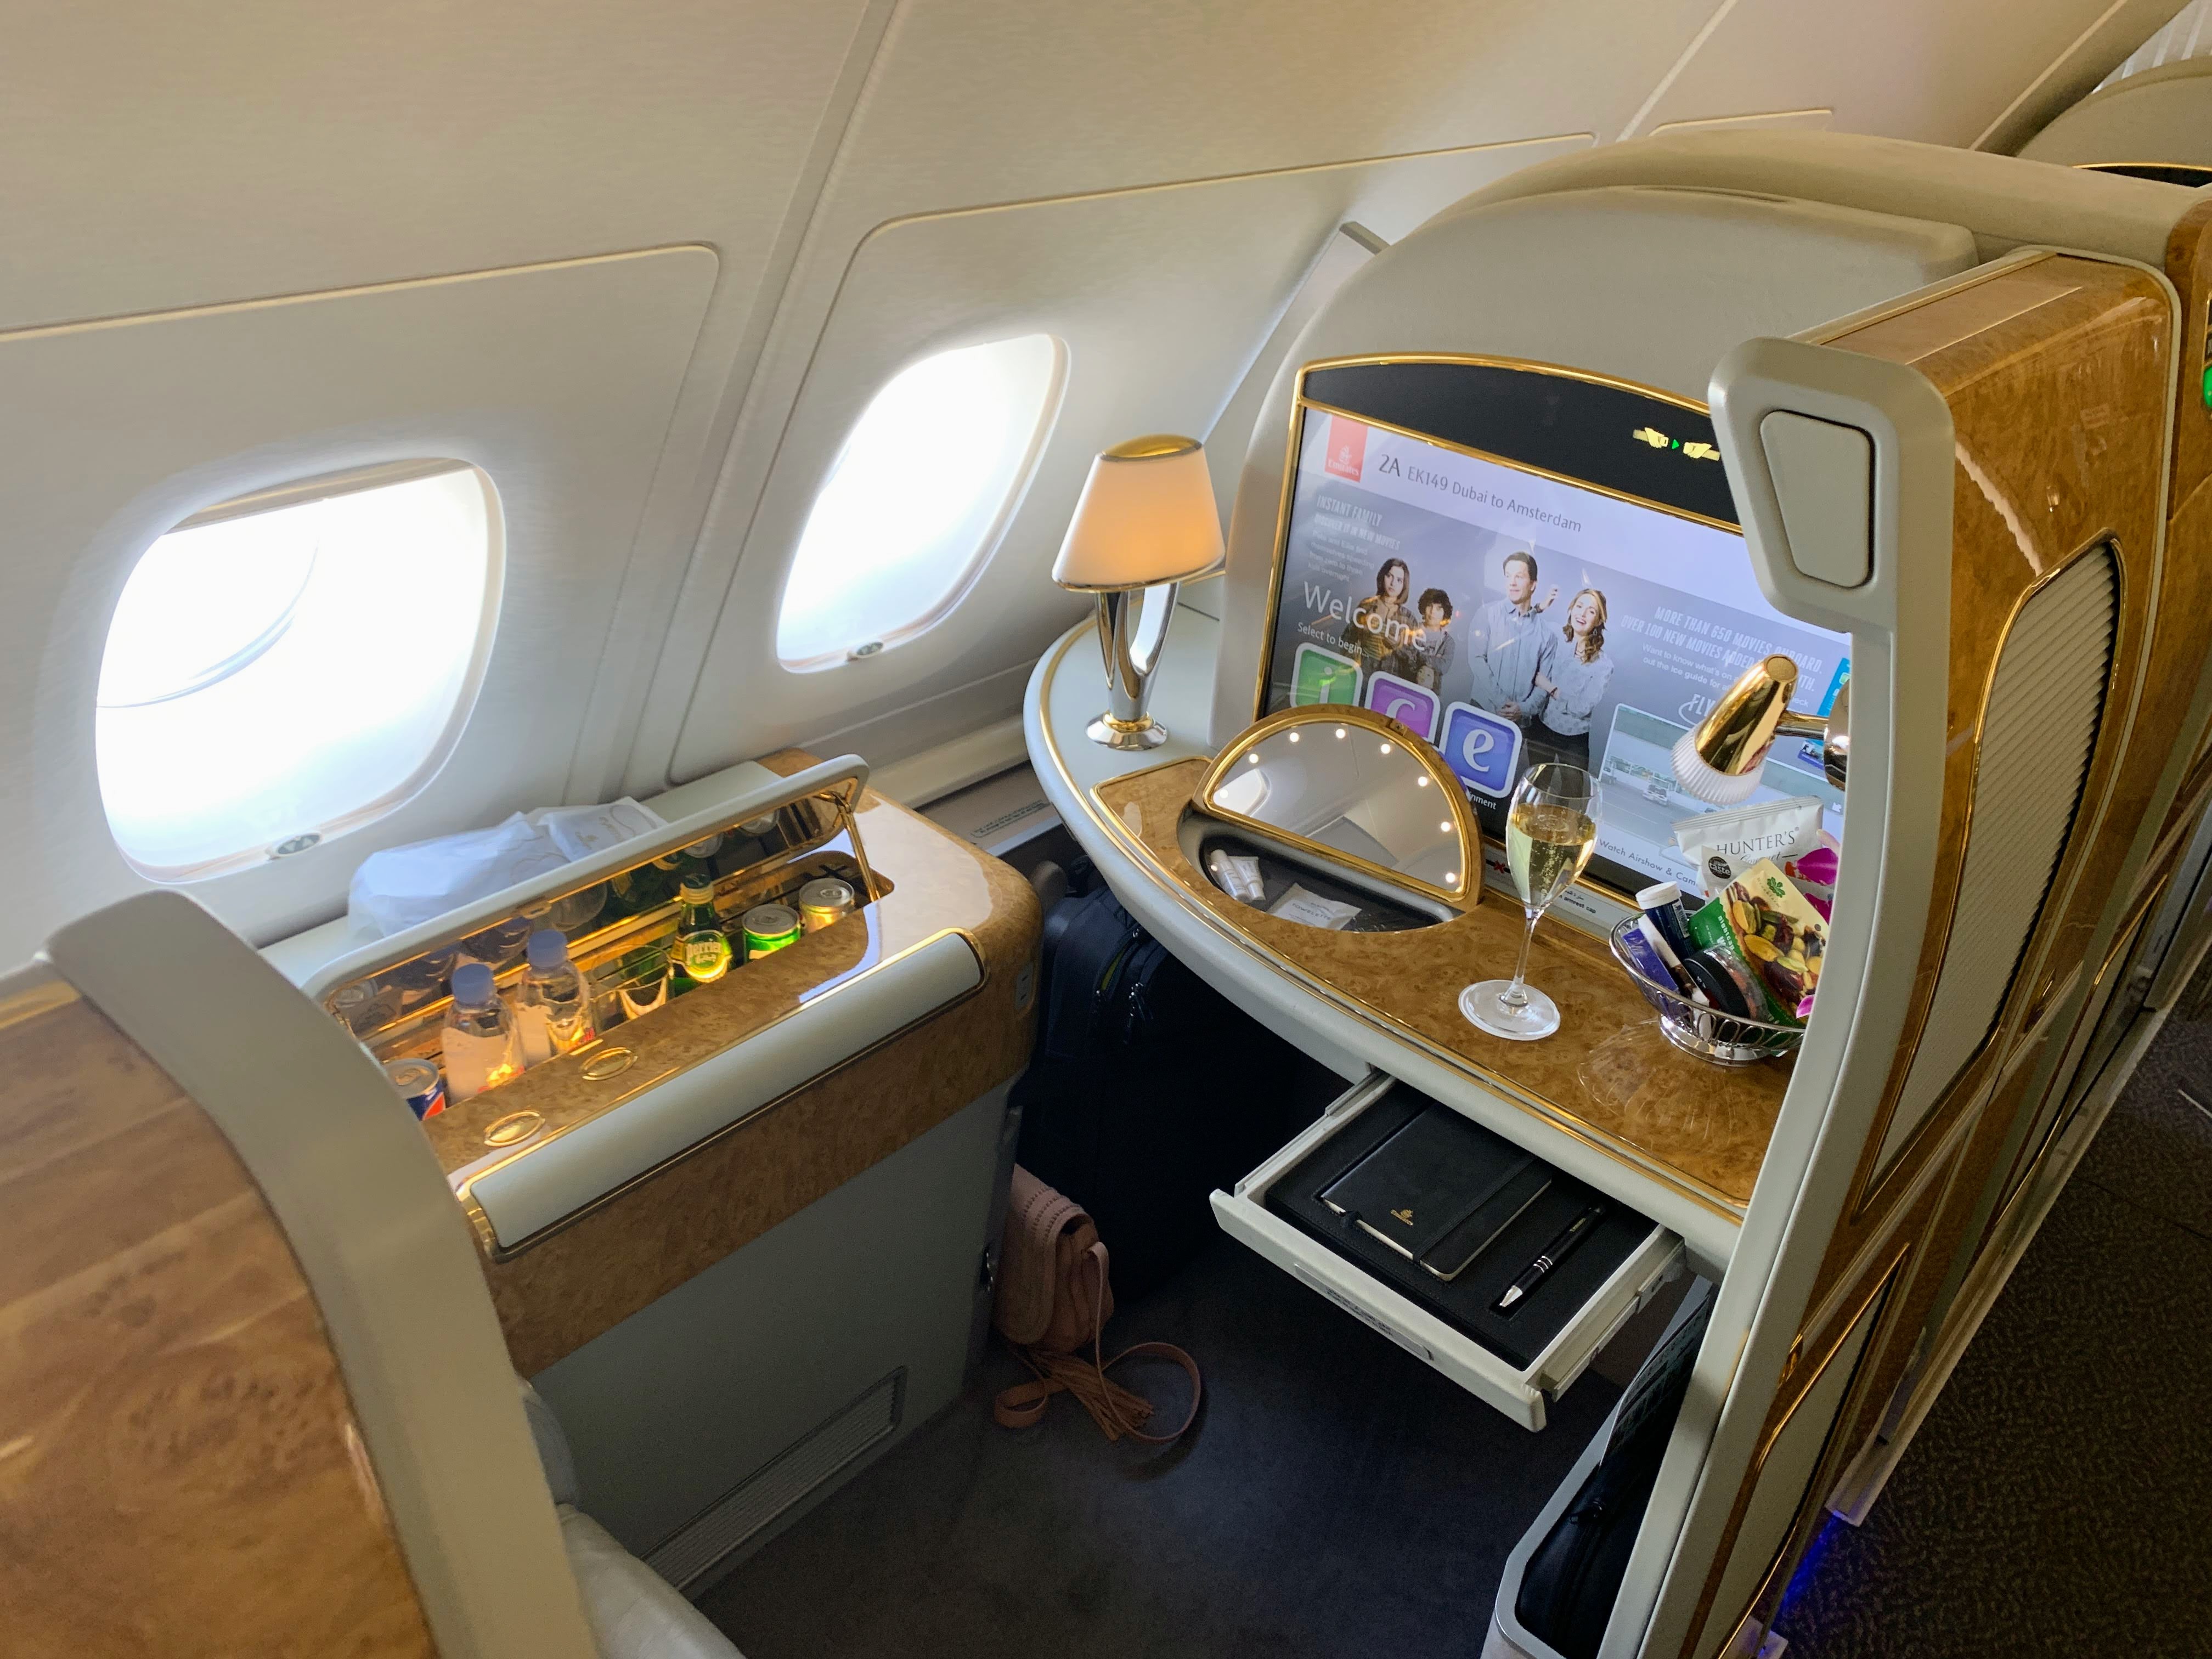 Emirates A380 First Class Review | Turn Left for Less